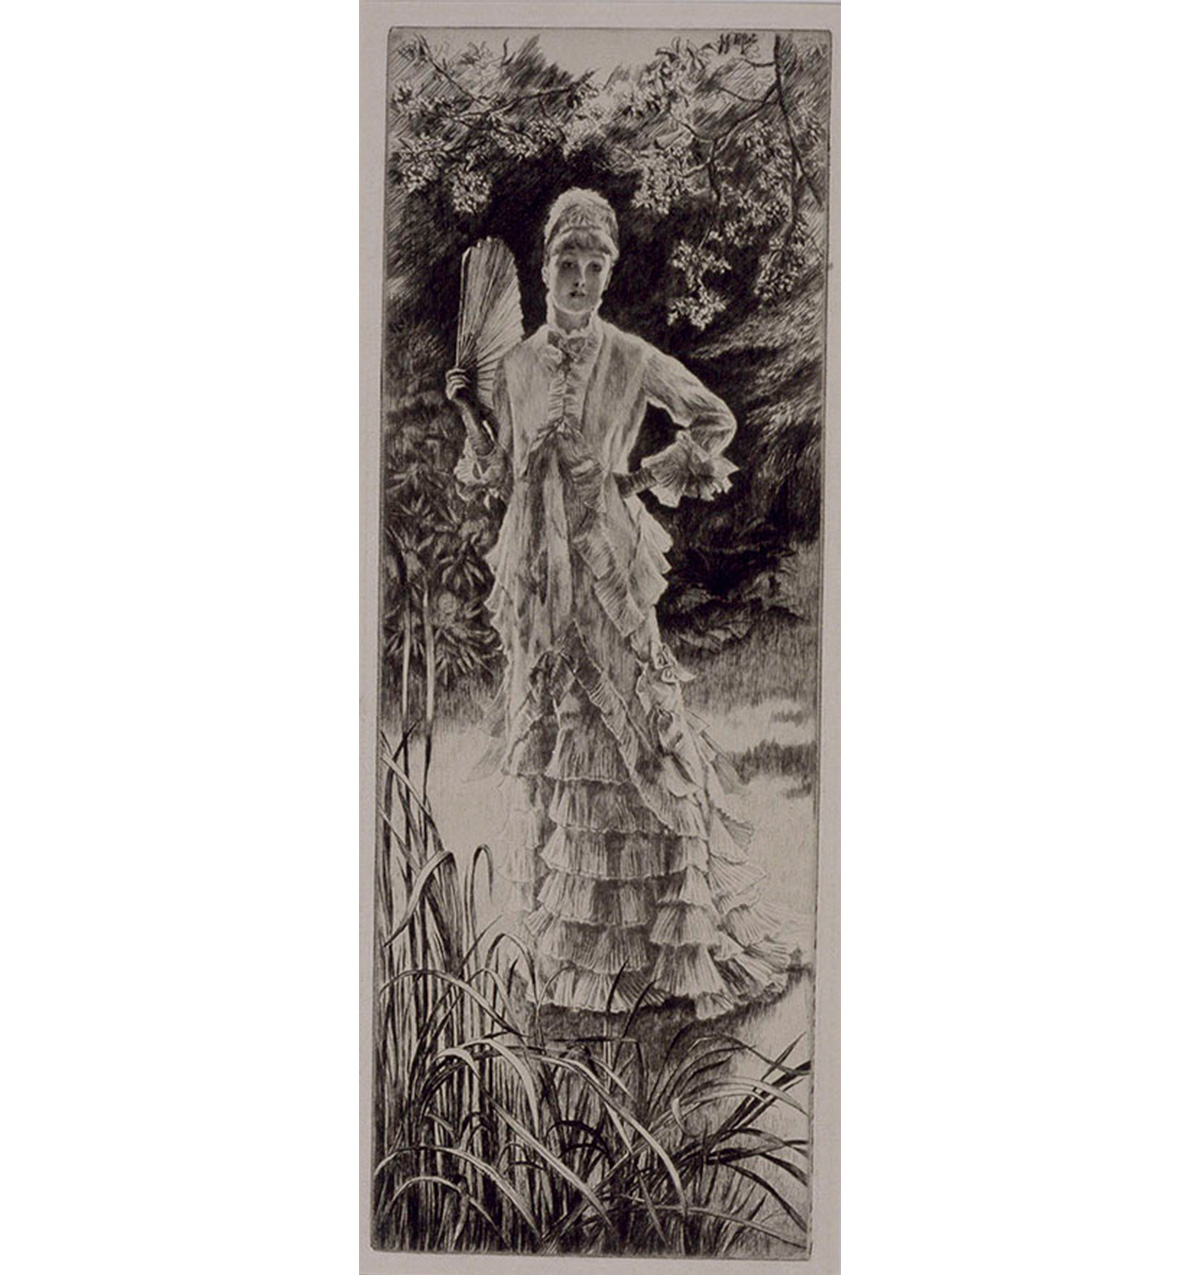 woman wearing long ruffled dress with hair in an updo, standing in a garden and carrying a fan